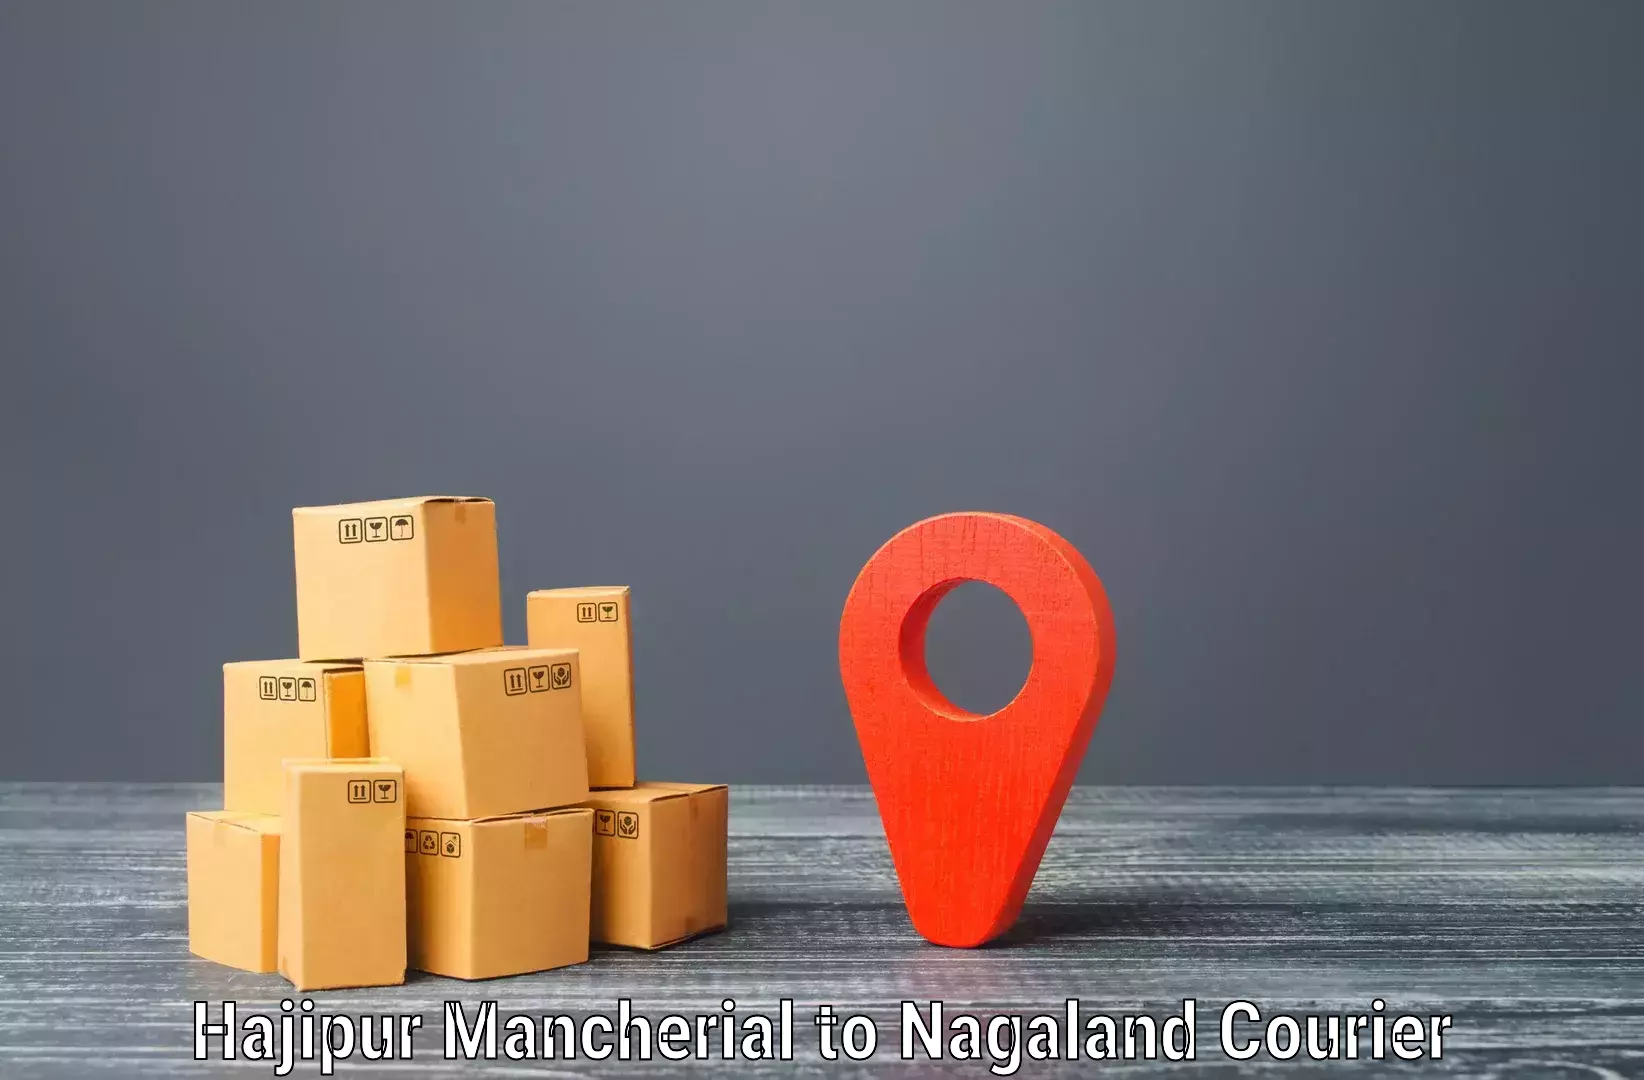 Reliable courier service in Hajipur Mancherial to Chumukedima